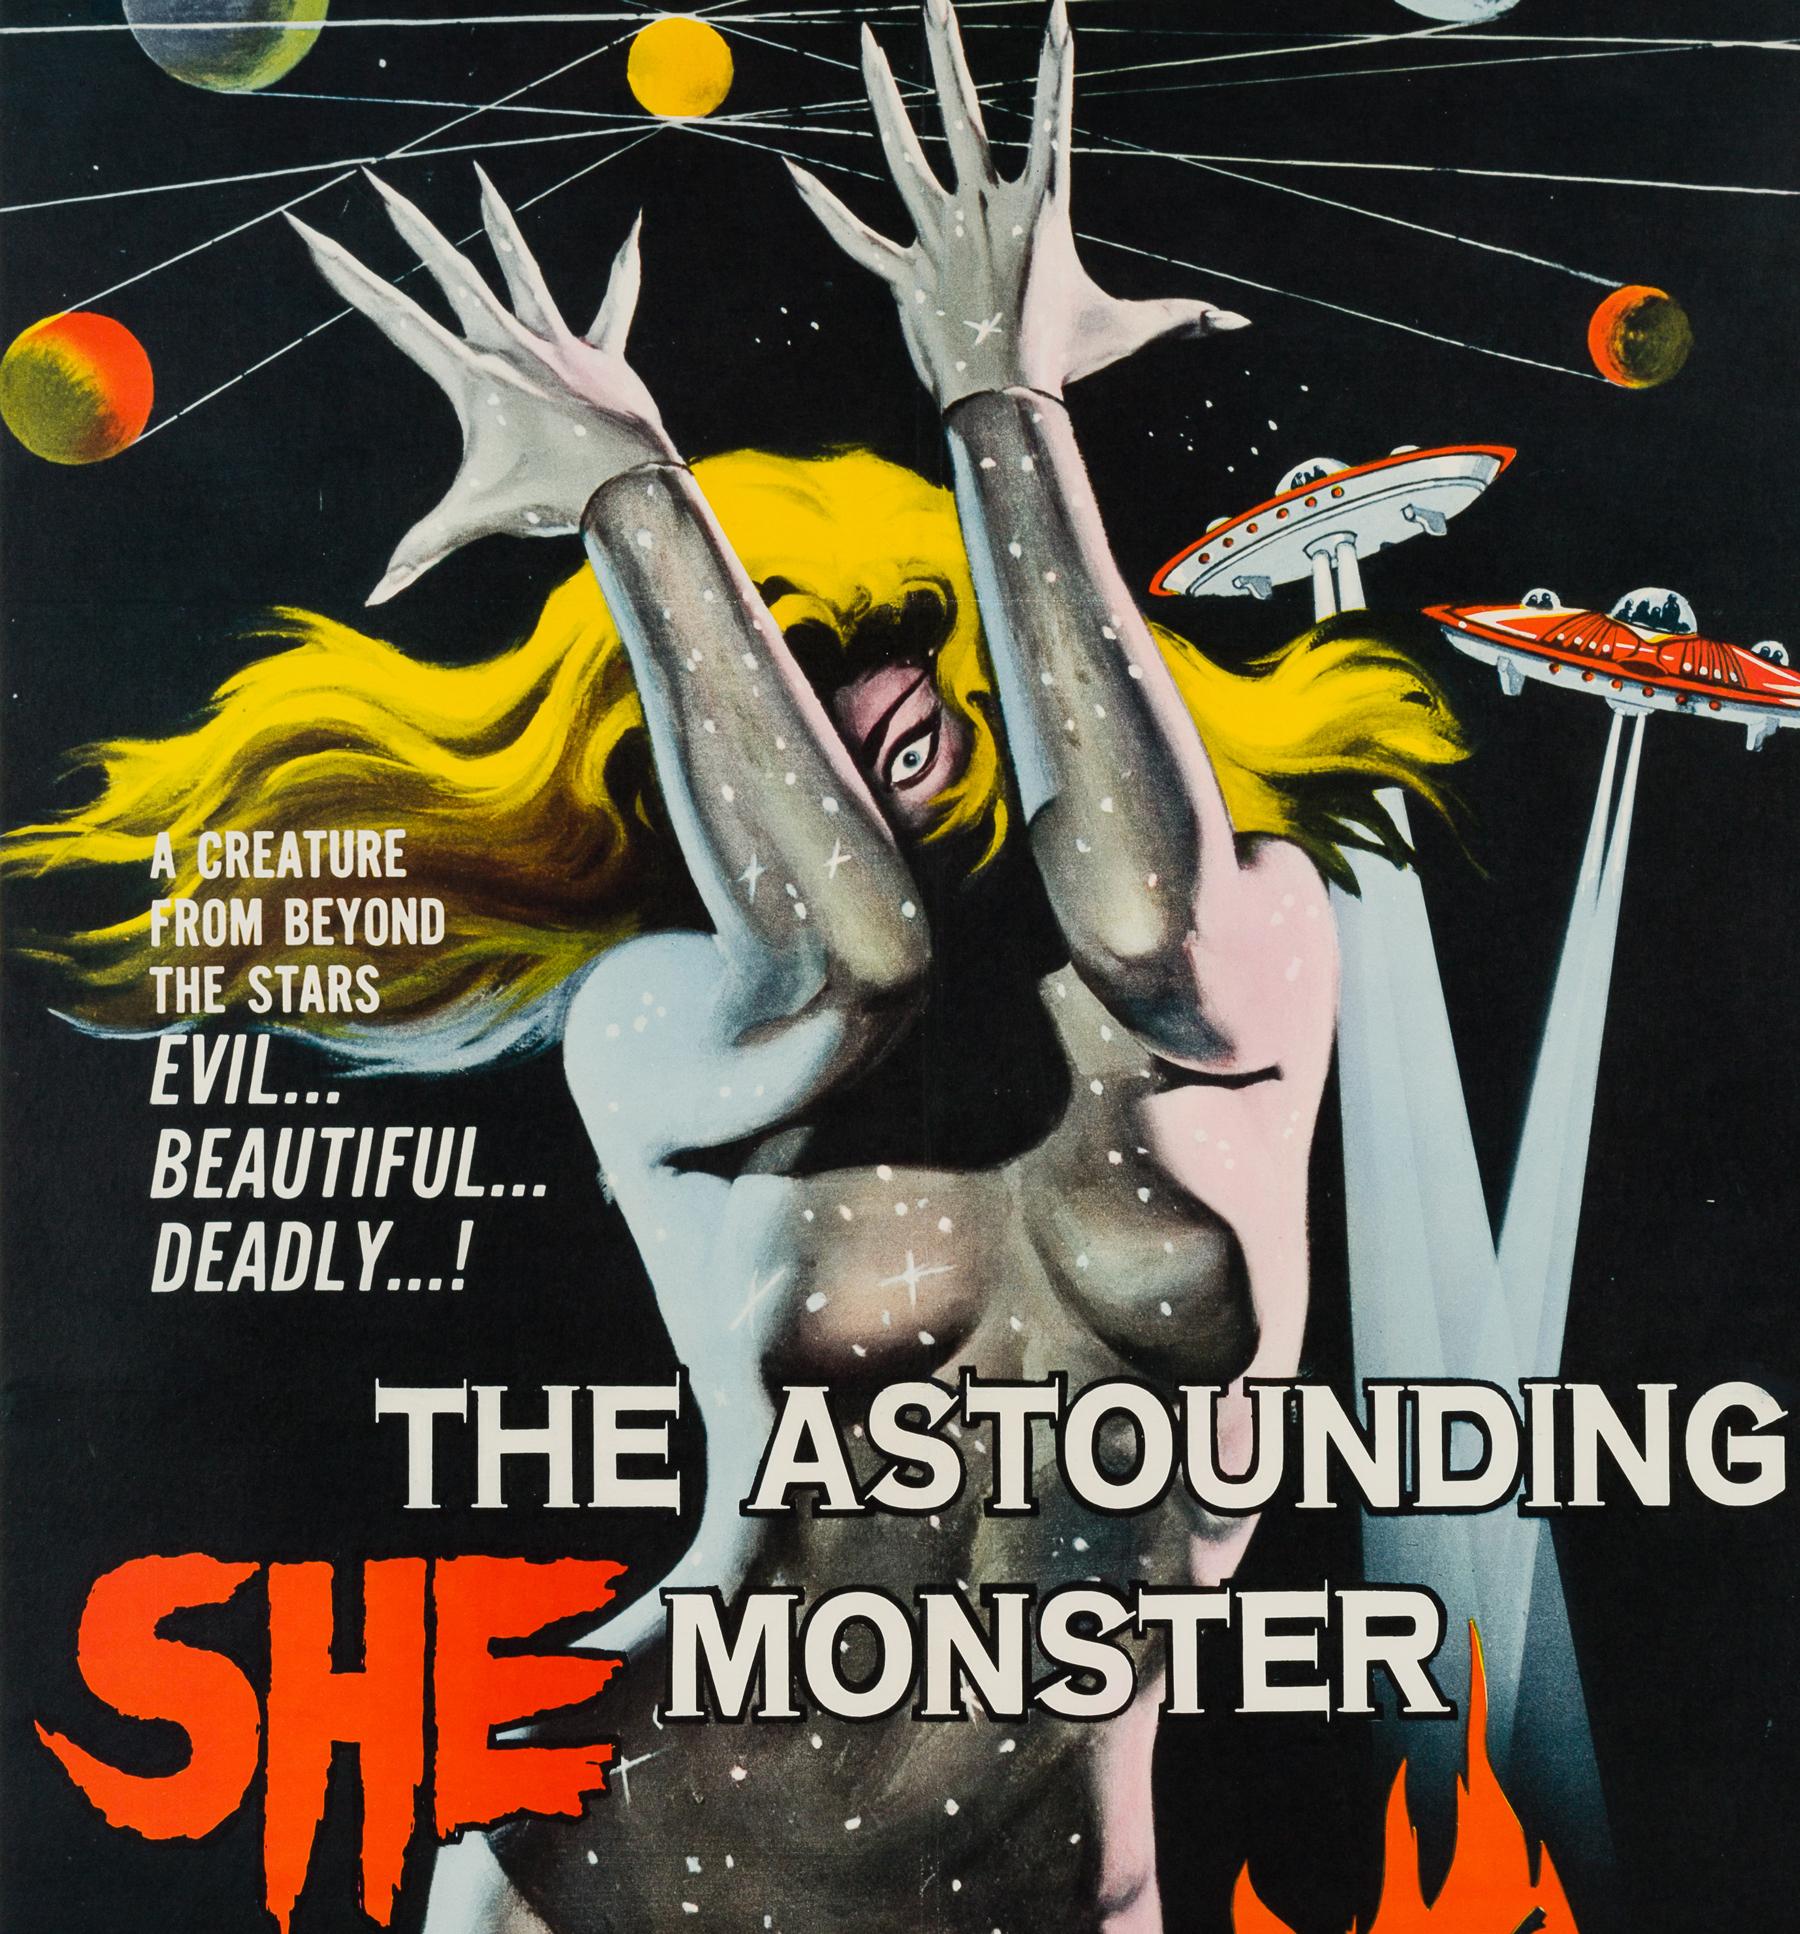 The Astounding She Monster, a cult Classic from 1950s Shock Theatre. Deservedly, one of the most sought after movie posters, featuring some fantastically cosmic and alluring artwork by legendary American International Pictures (AIP) artist Albert